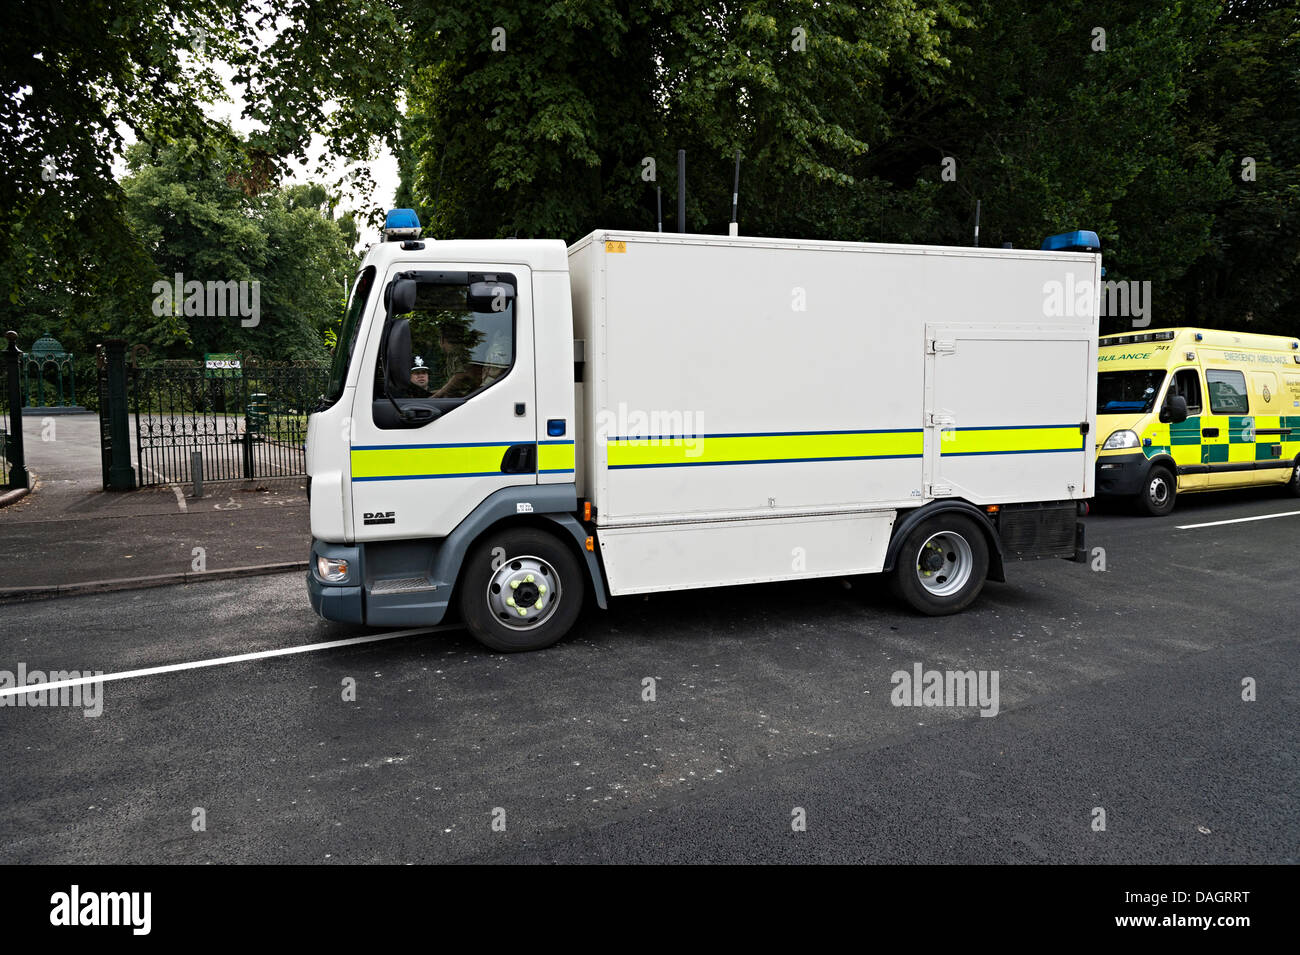 Tipton, West Midlands, UK. 12th July 2013. Mosque nail bomb disposal van Credit:  i4images/Alamy Live News Stock Photo